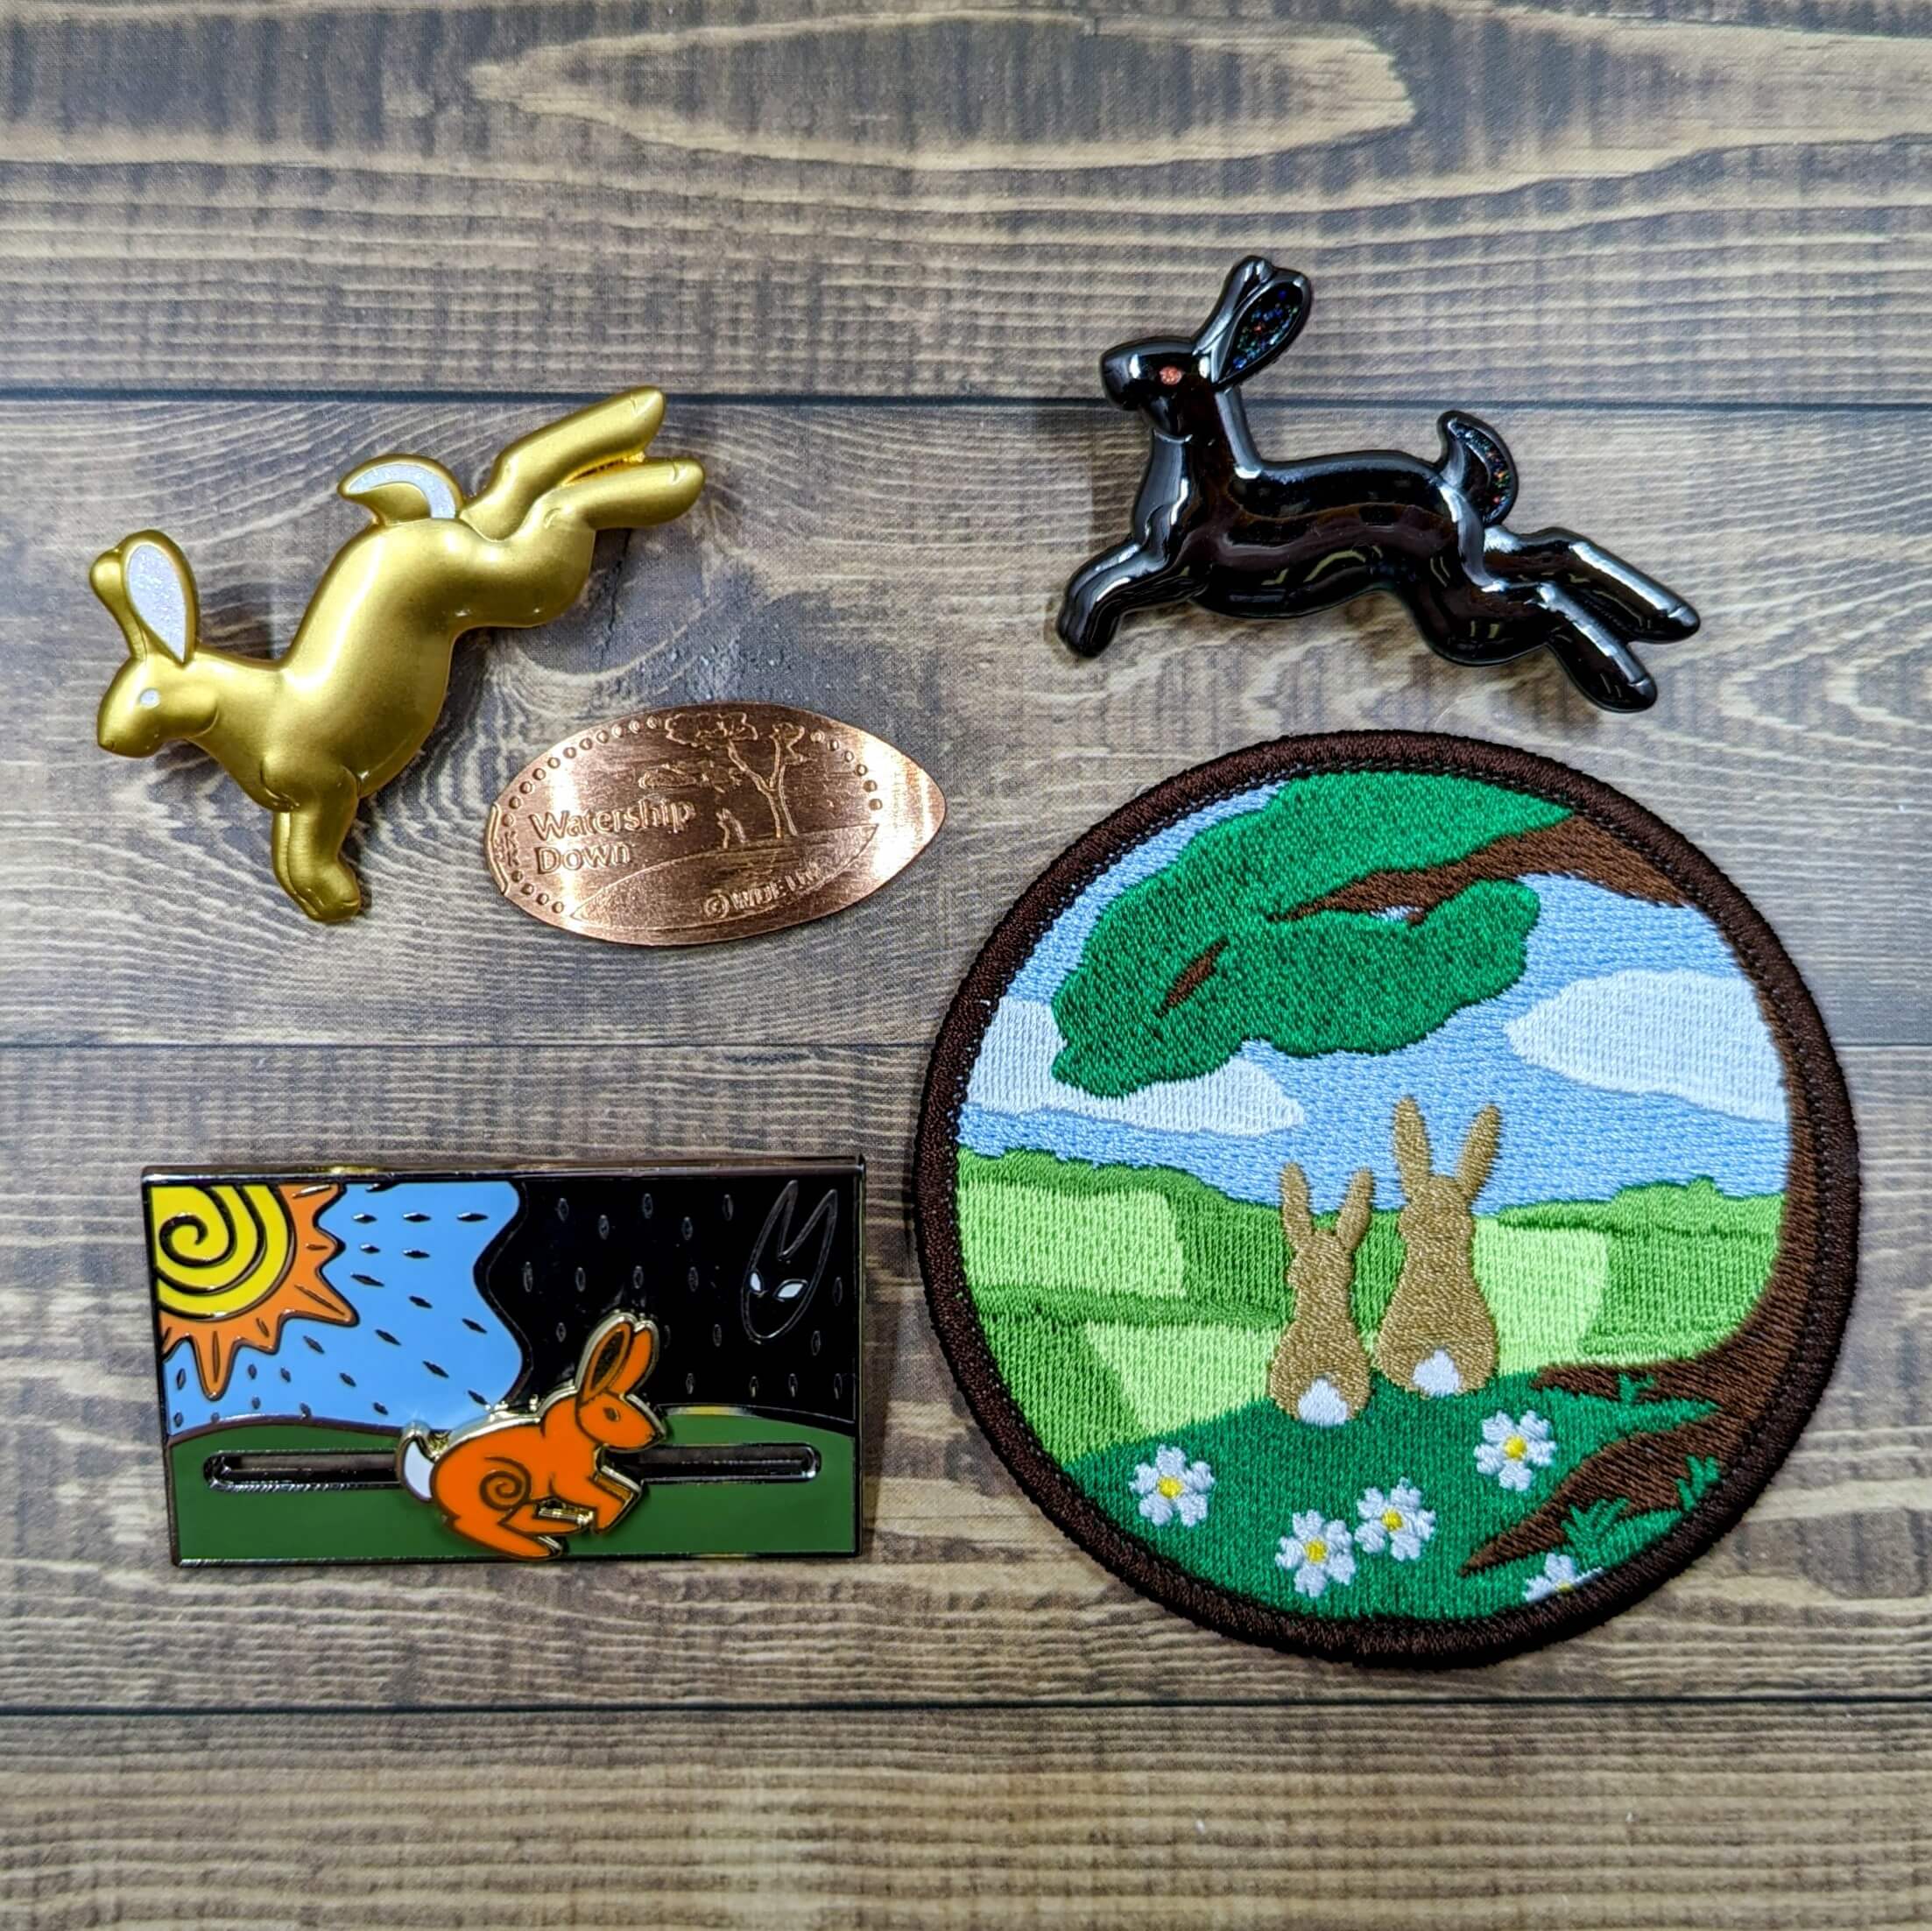 Officially Licensed Watership Down Items